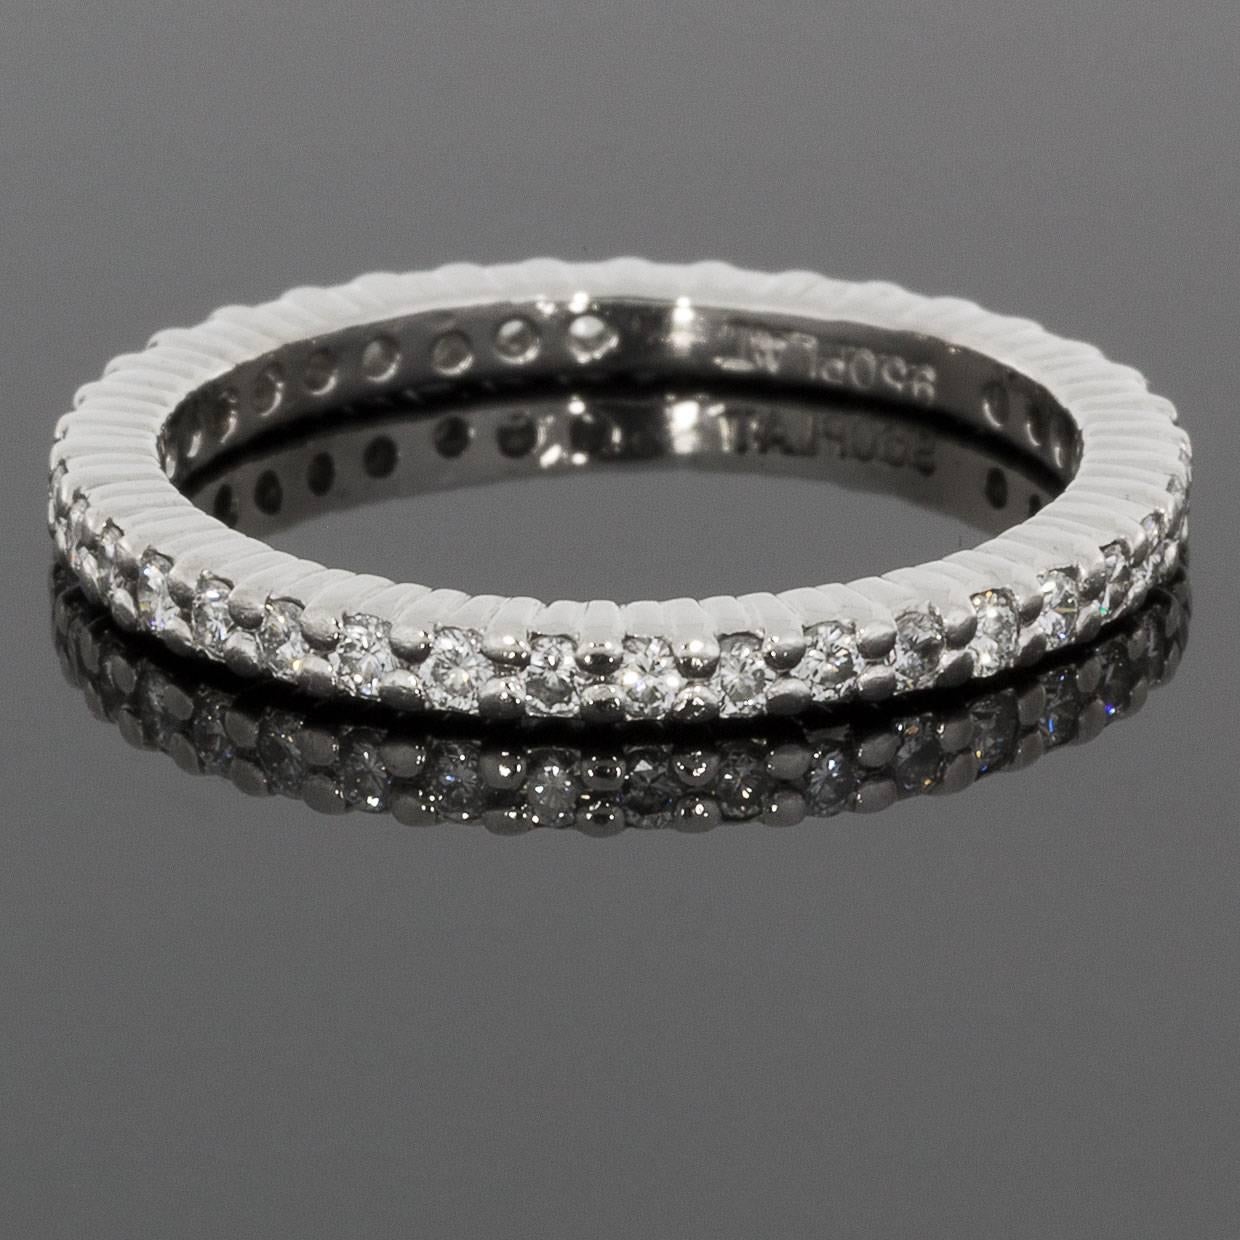 This beautiful, high quality band is a timeless platinum round diamond eternity band that can dress up any ring. It can be used as a wedding band, stand alone band, or stack ring. The ring has 38 round brilliant cut diamonds that have a combined